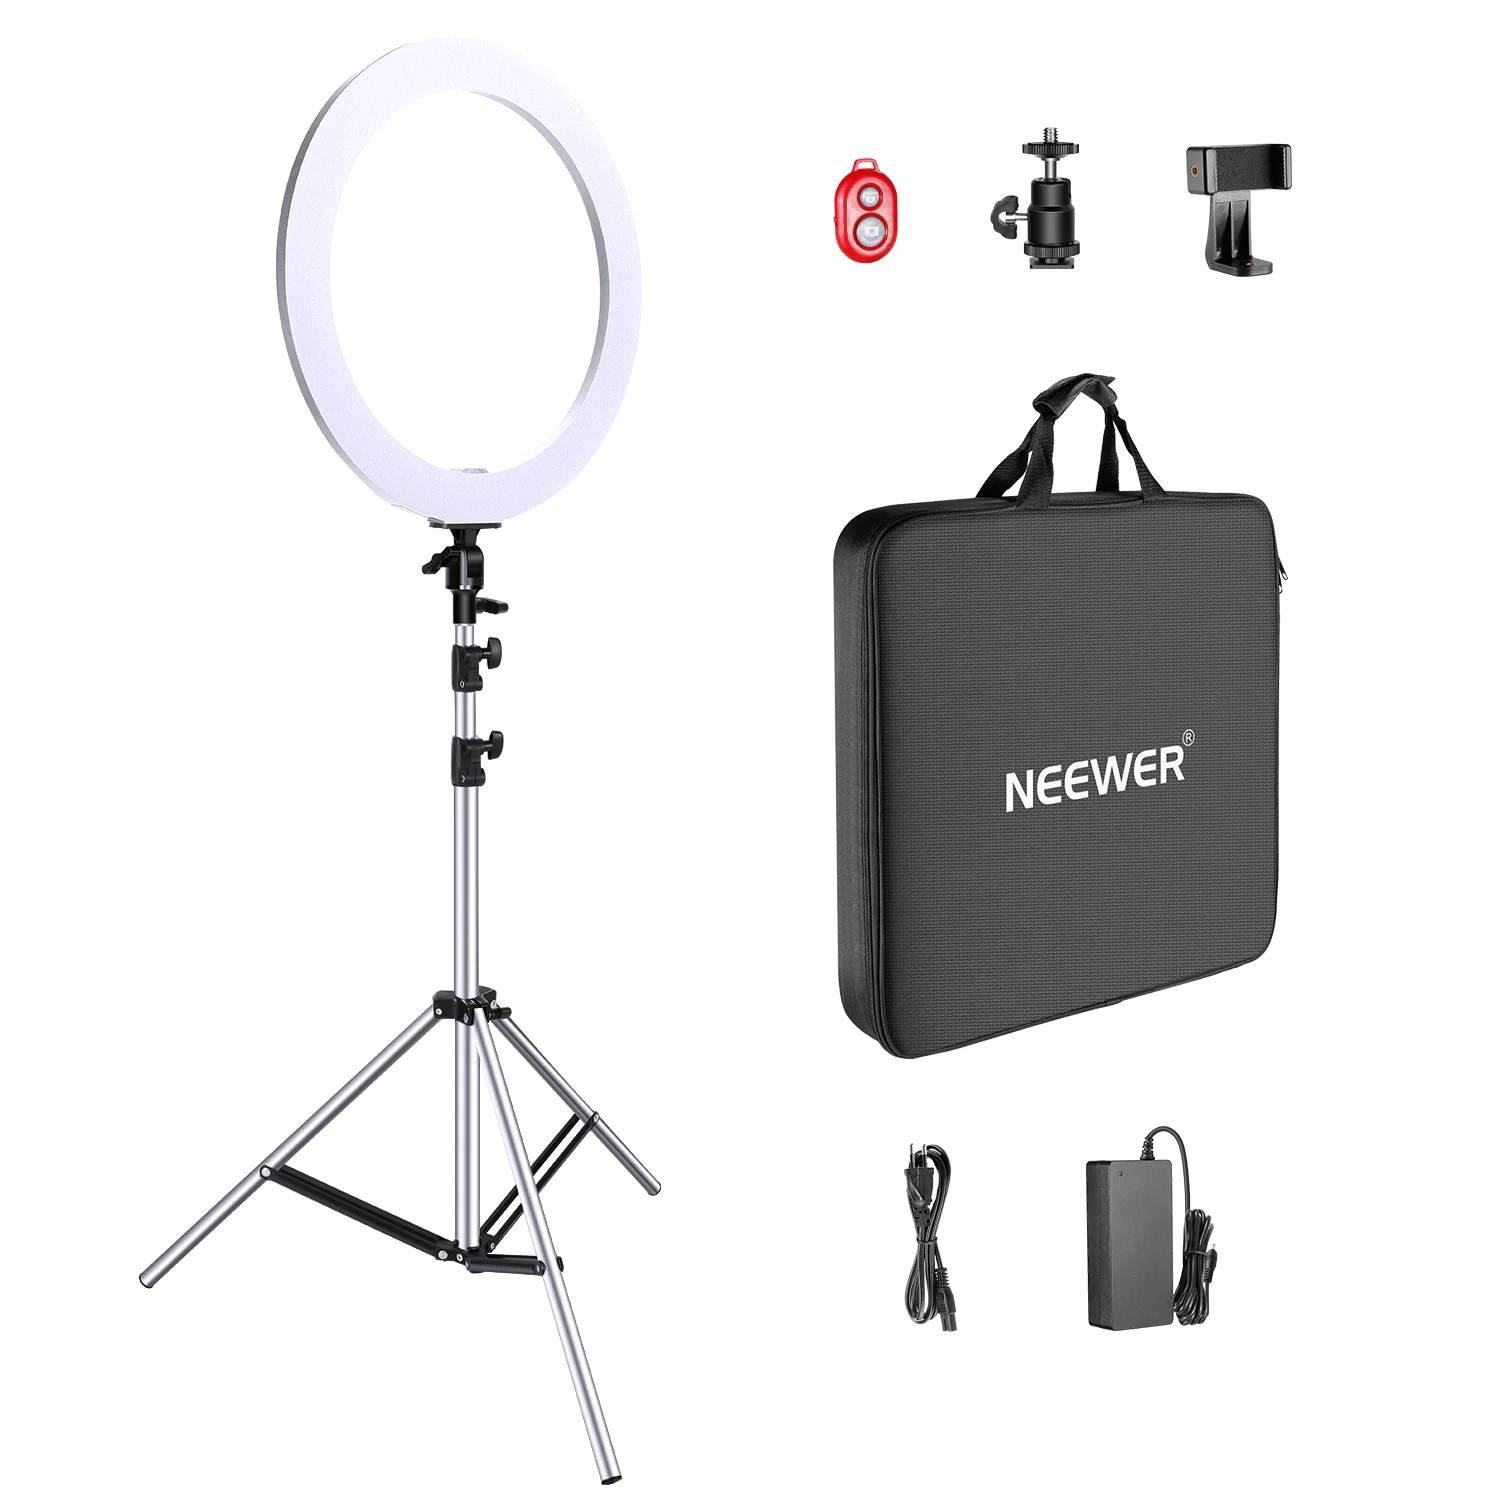 42W 3200-5600K Ring Light with Silver Aluminium Alloy Shell and Silver Stainless Steel Light Stand for Salon Selfie Make-up Video Shooting Neewer Upgraded 18-inch Ring Light Silver Metal Lighting Kit 